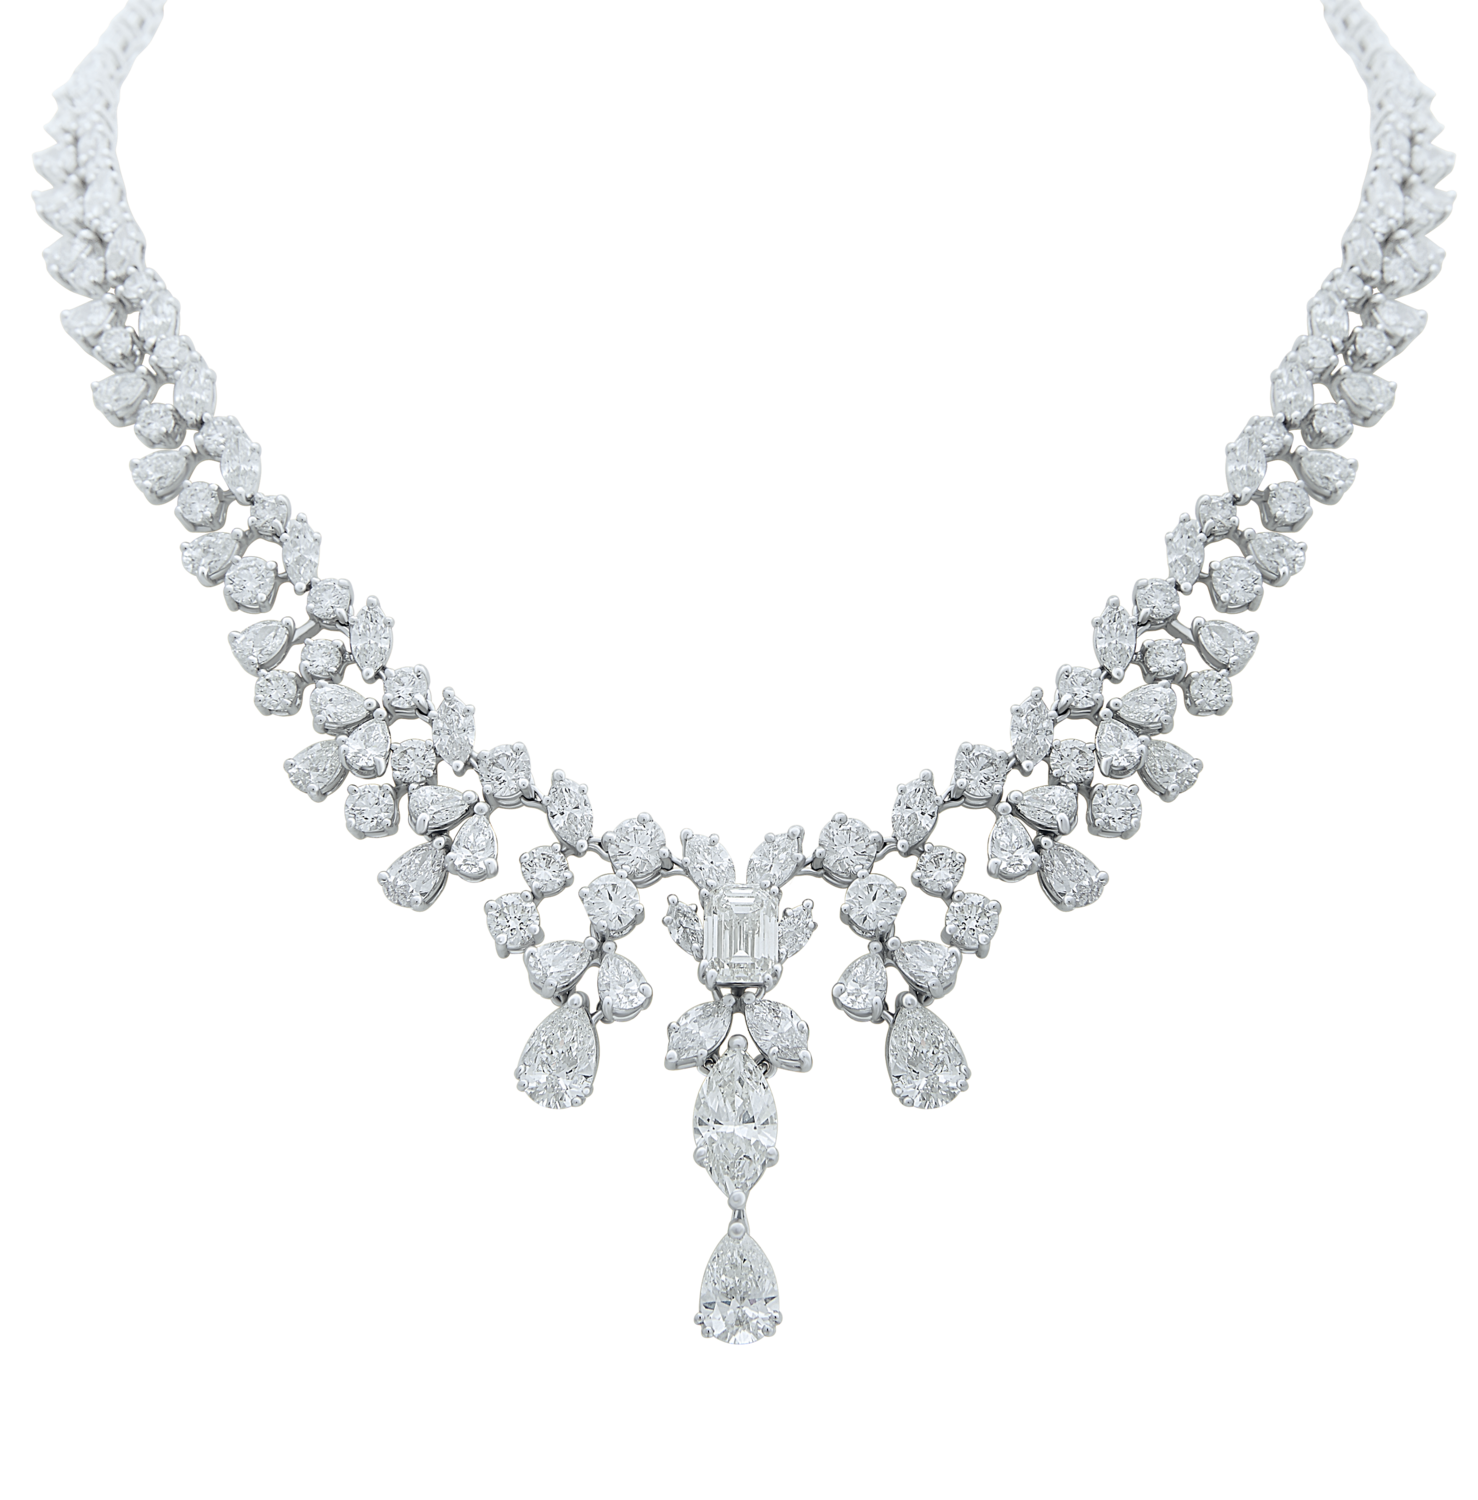 Eternal Diamond Necklace with Emerald-cut, Marquise and Pear